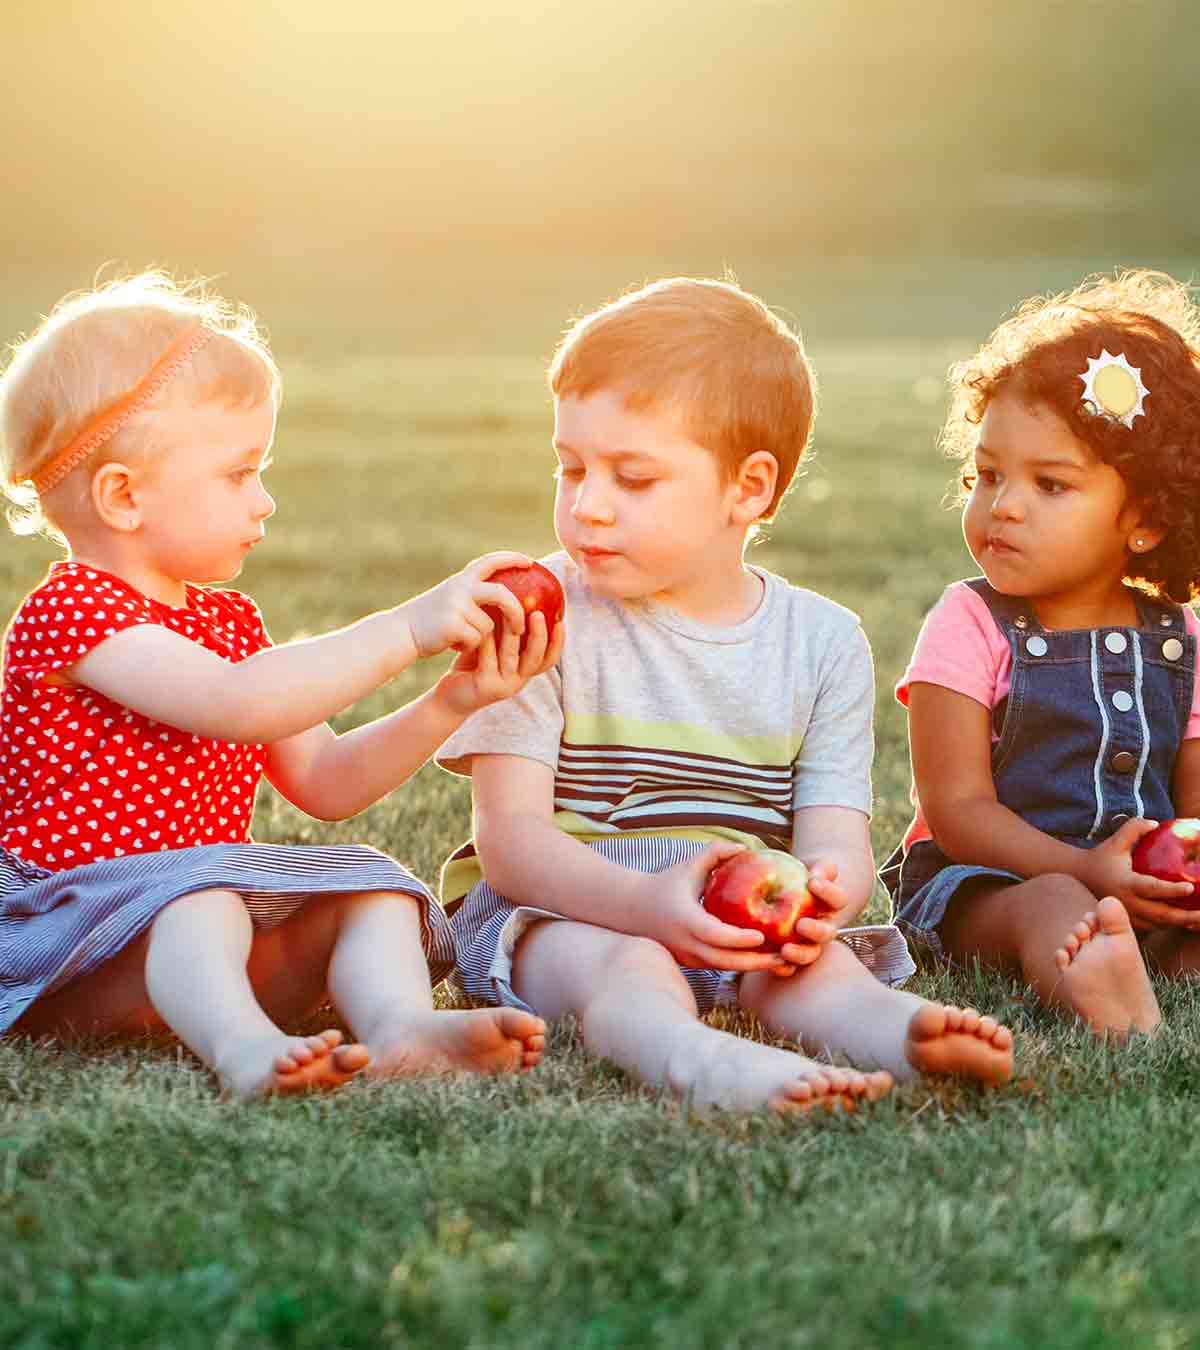 10 Interesting Apple Facts For Kids & Its Health Benefits